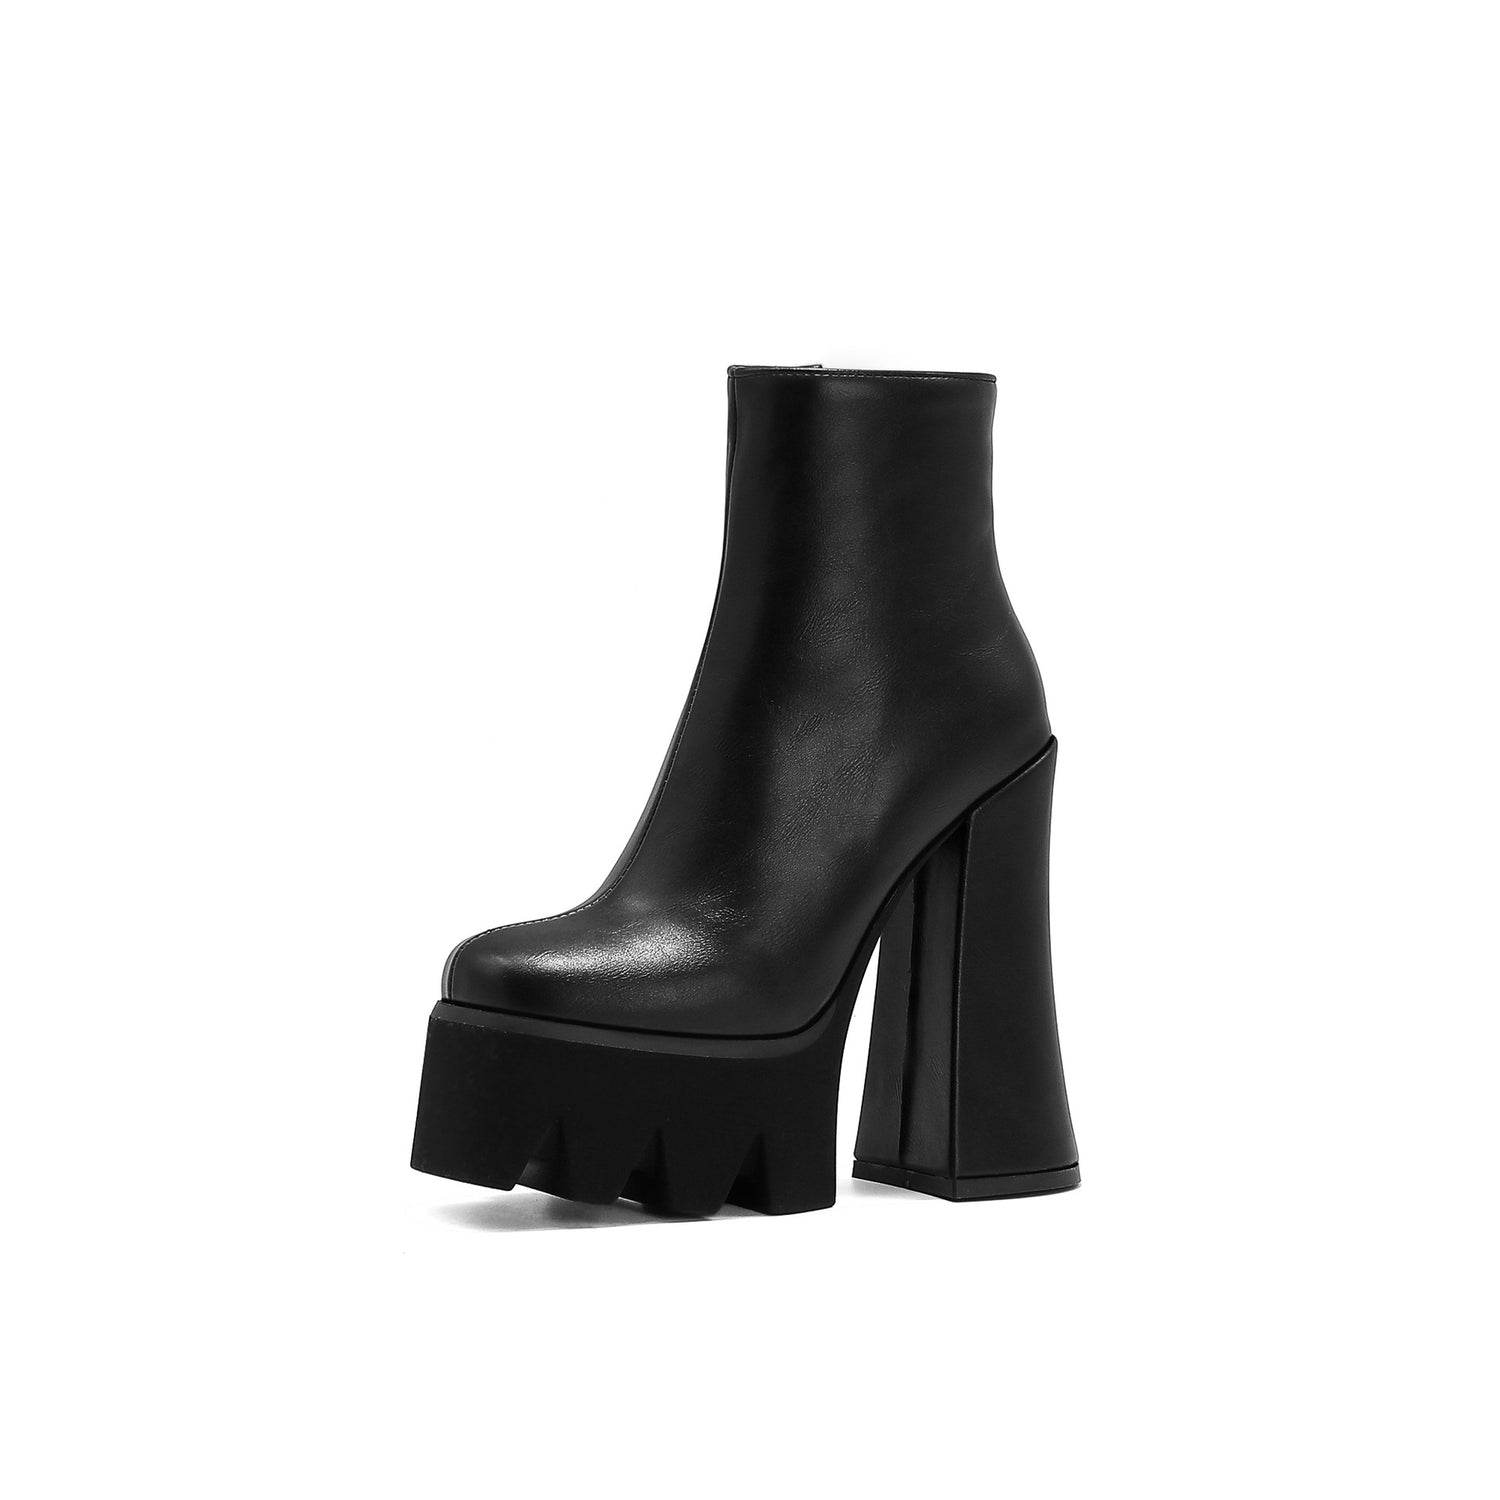 High-heeled Platform Large Size Women's Boots  Heeled Boots Thecurvestory